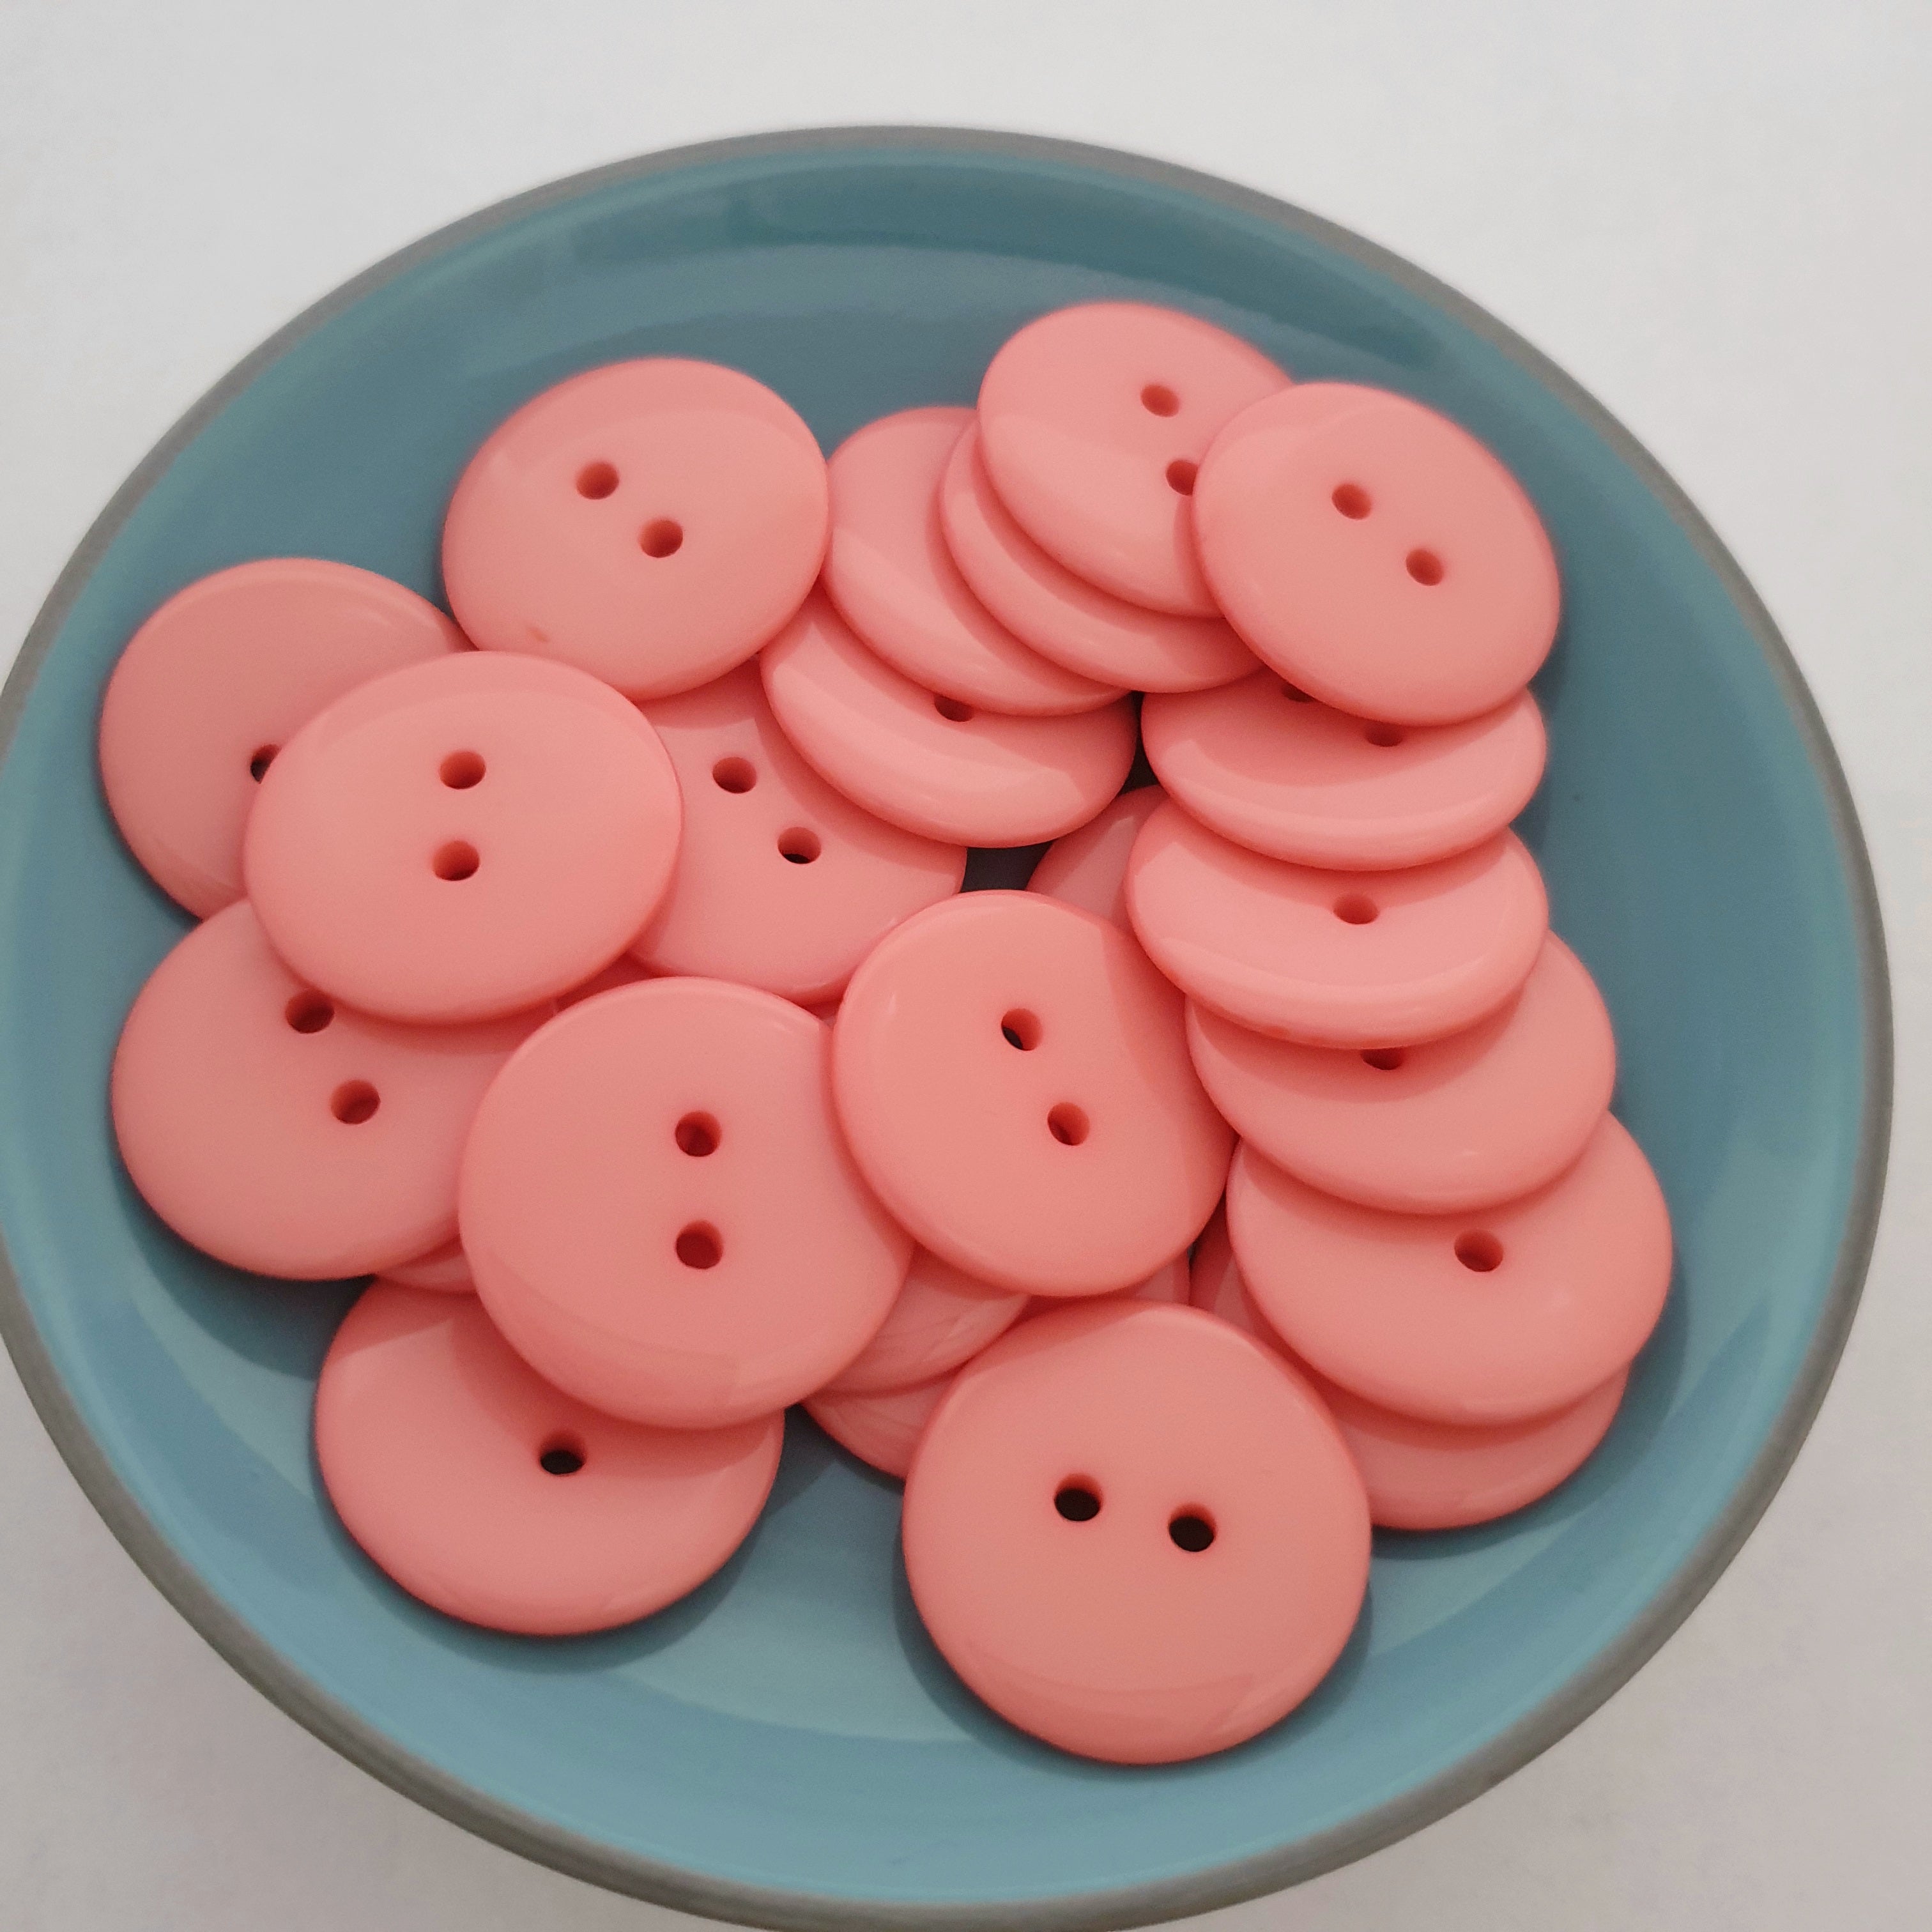 MajorCrafts 36pcs 23mm Coral Pink 2 Holes Round Large Resin Sewing Buttons